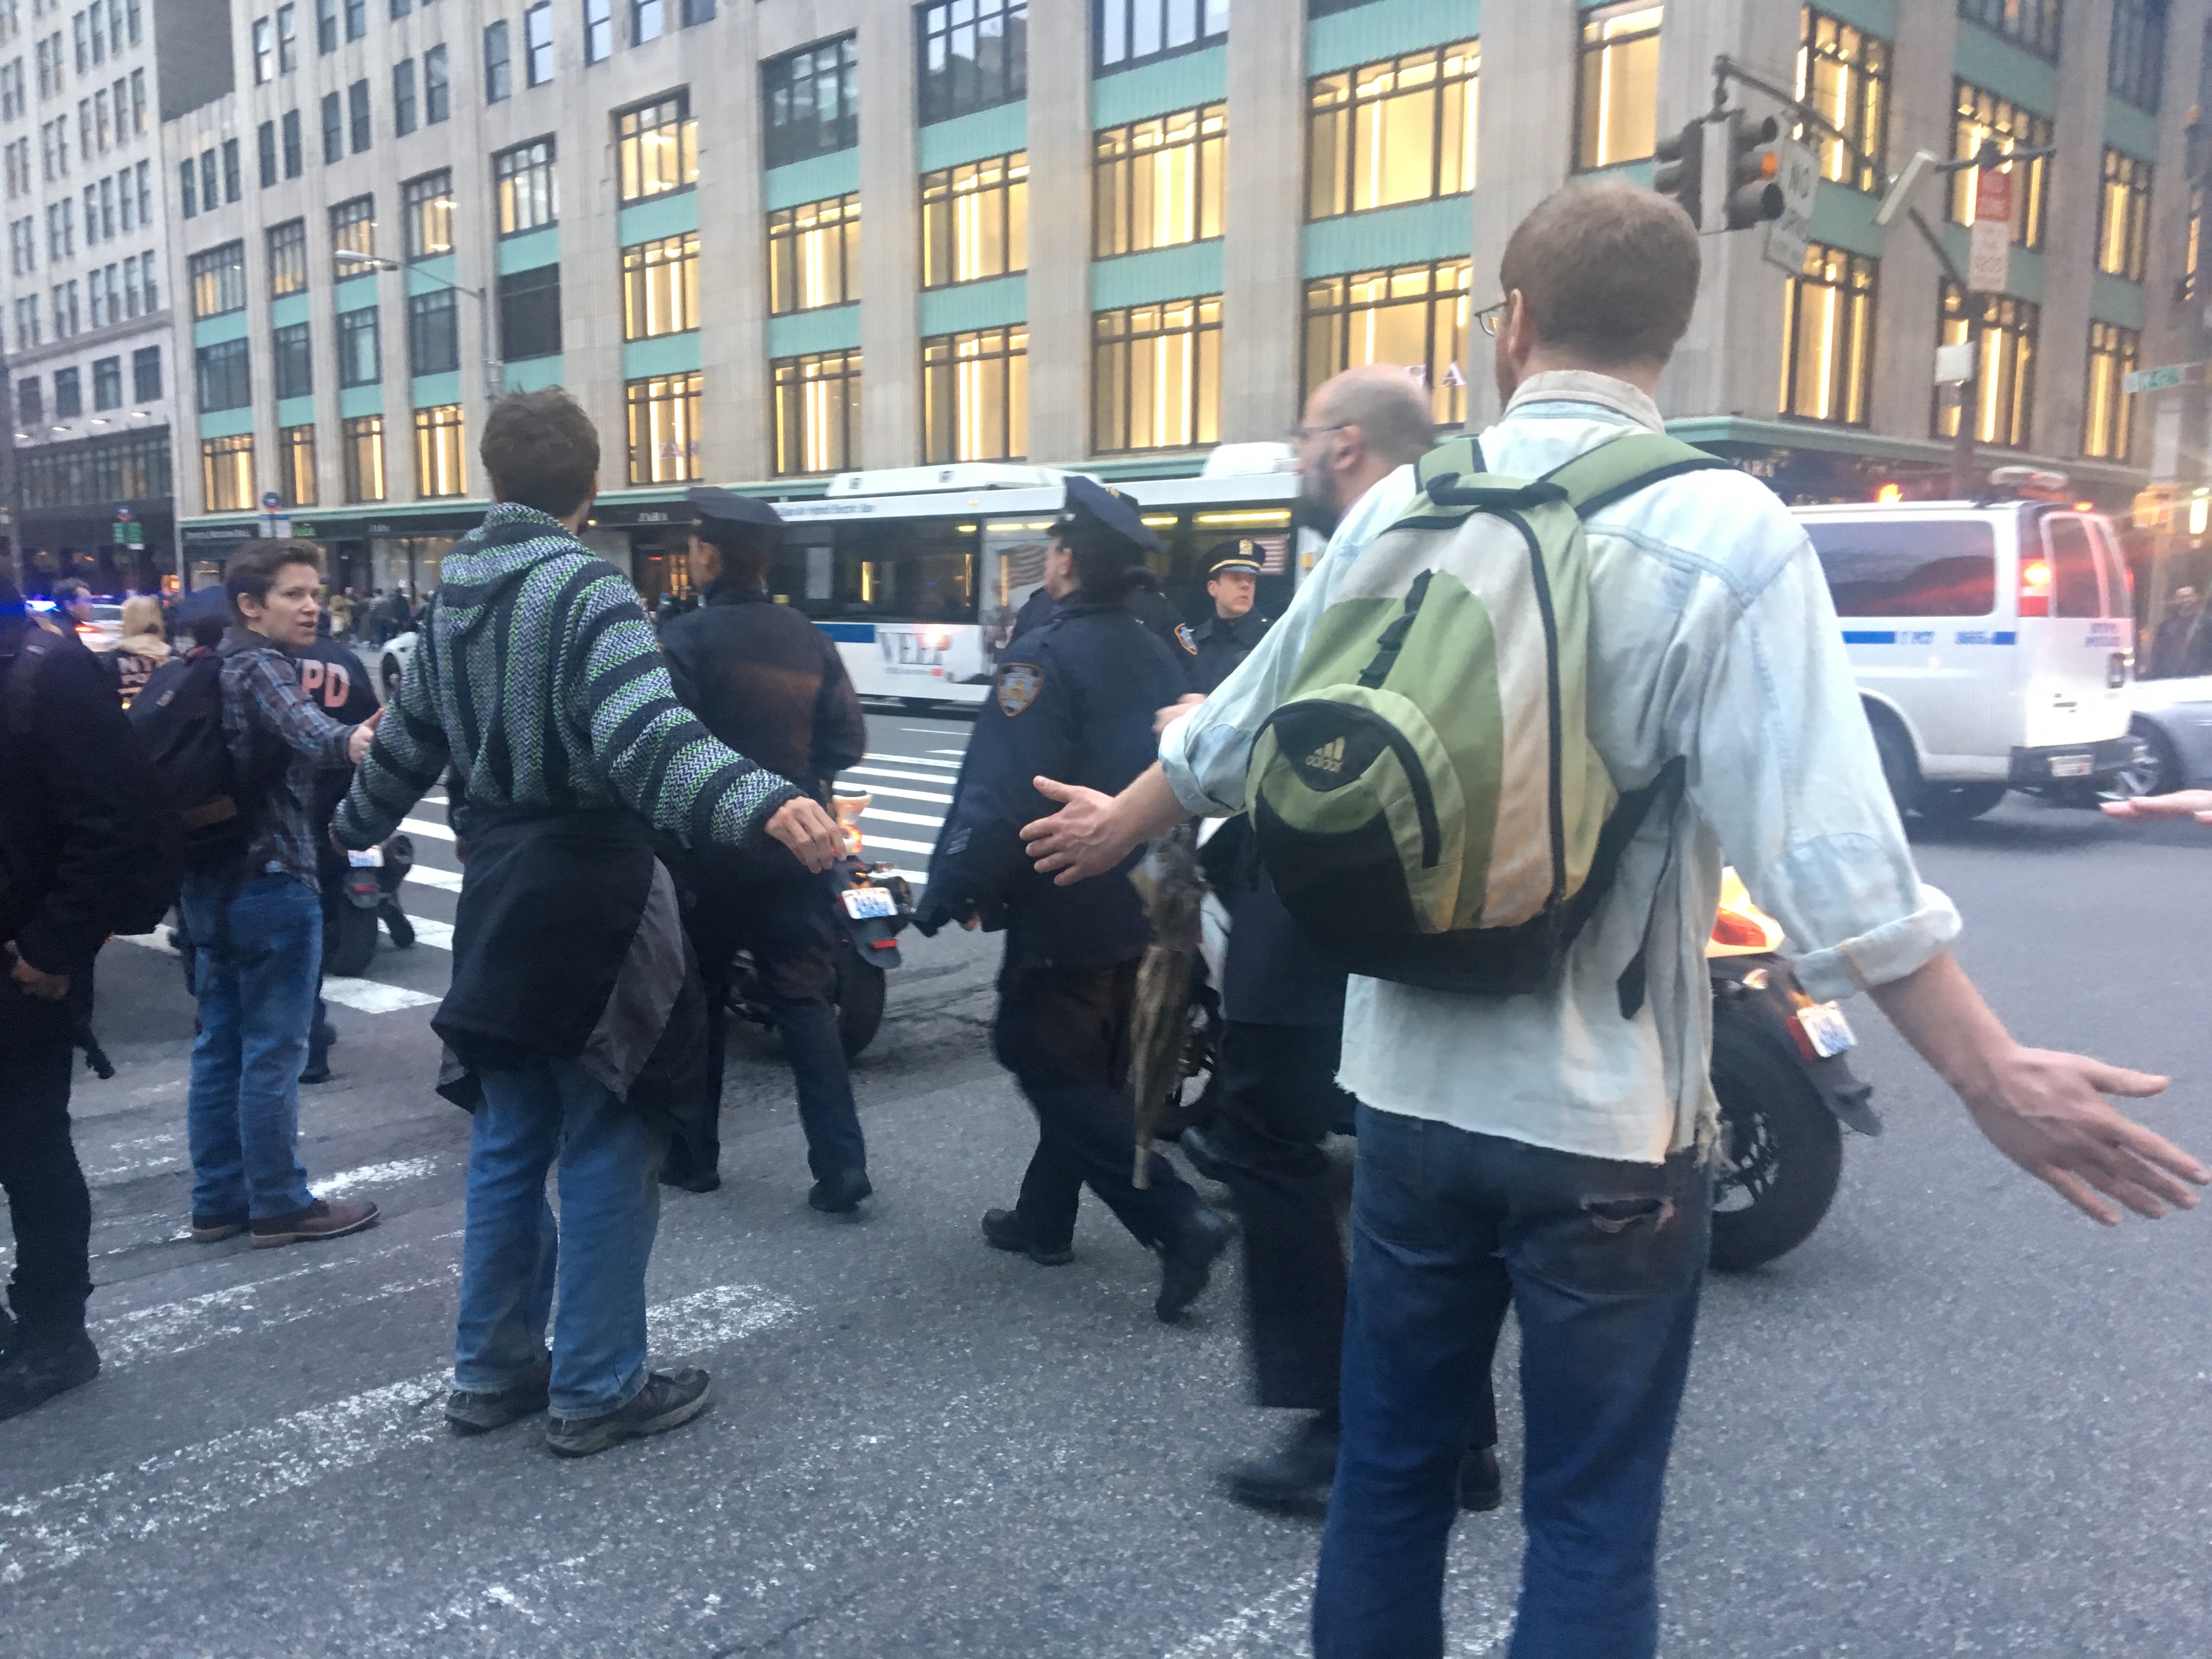 Protesters block police from the sidewalk.